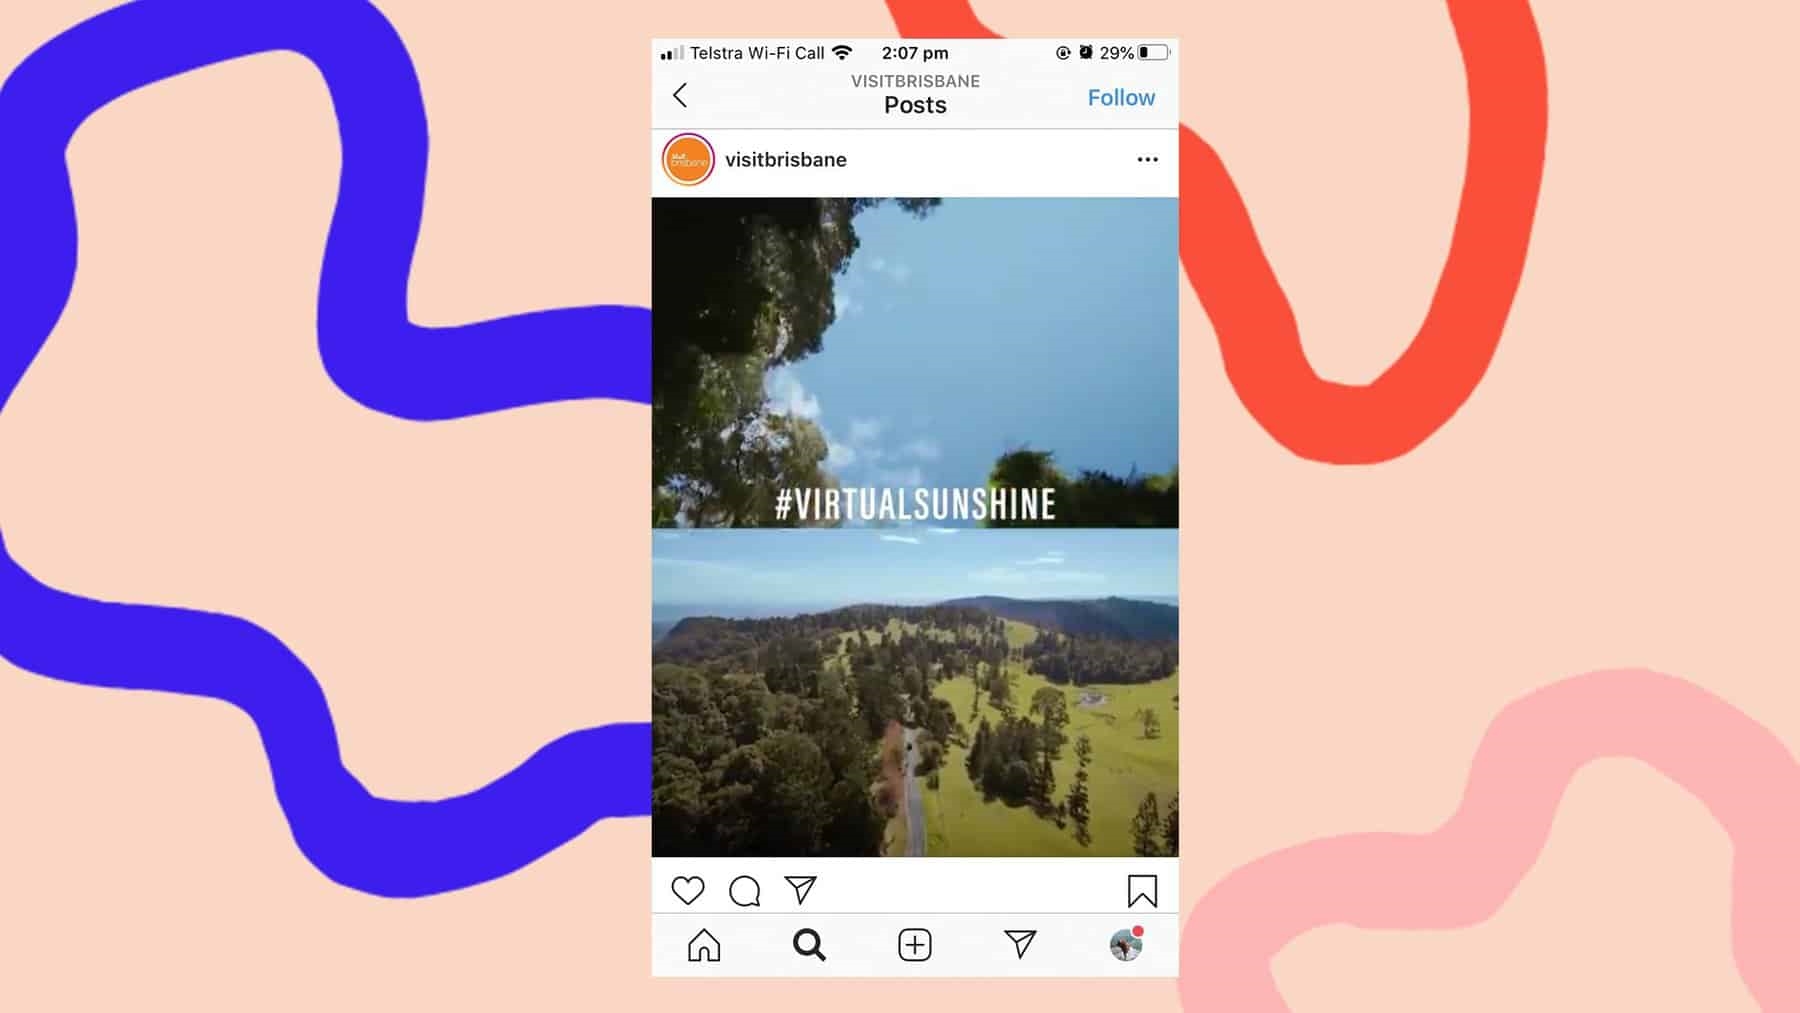 How Should Brands Be Using Instagram During COVID-19?